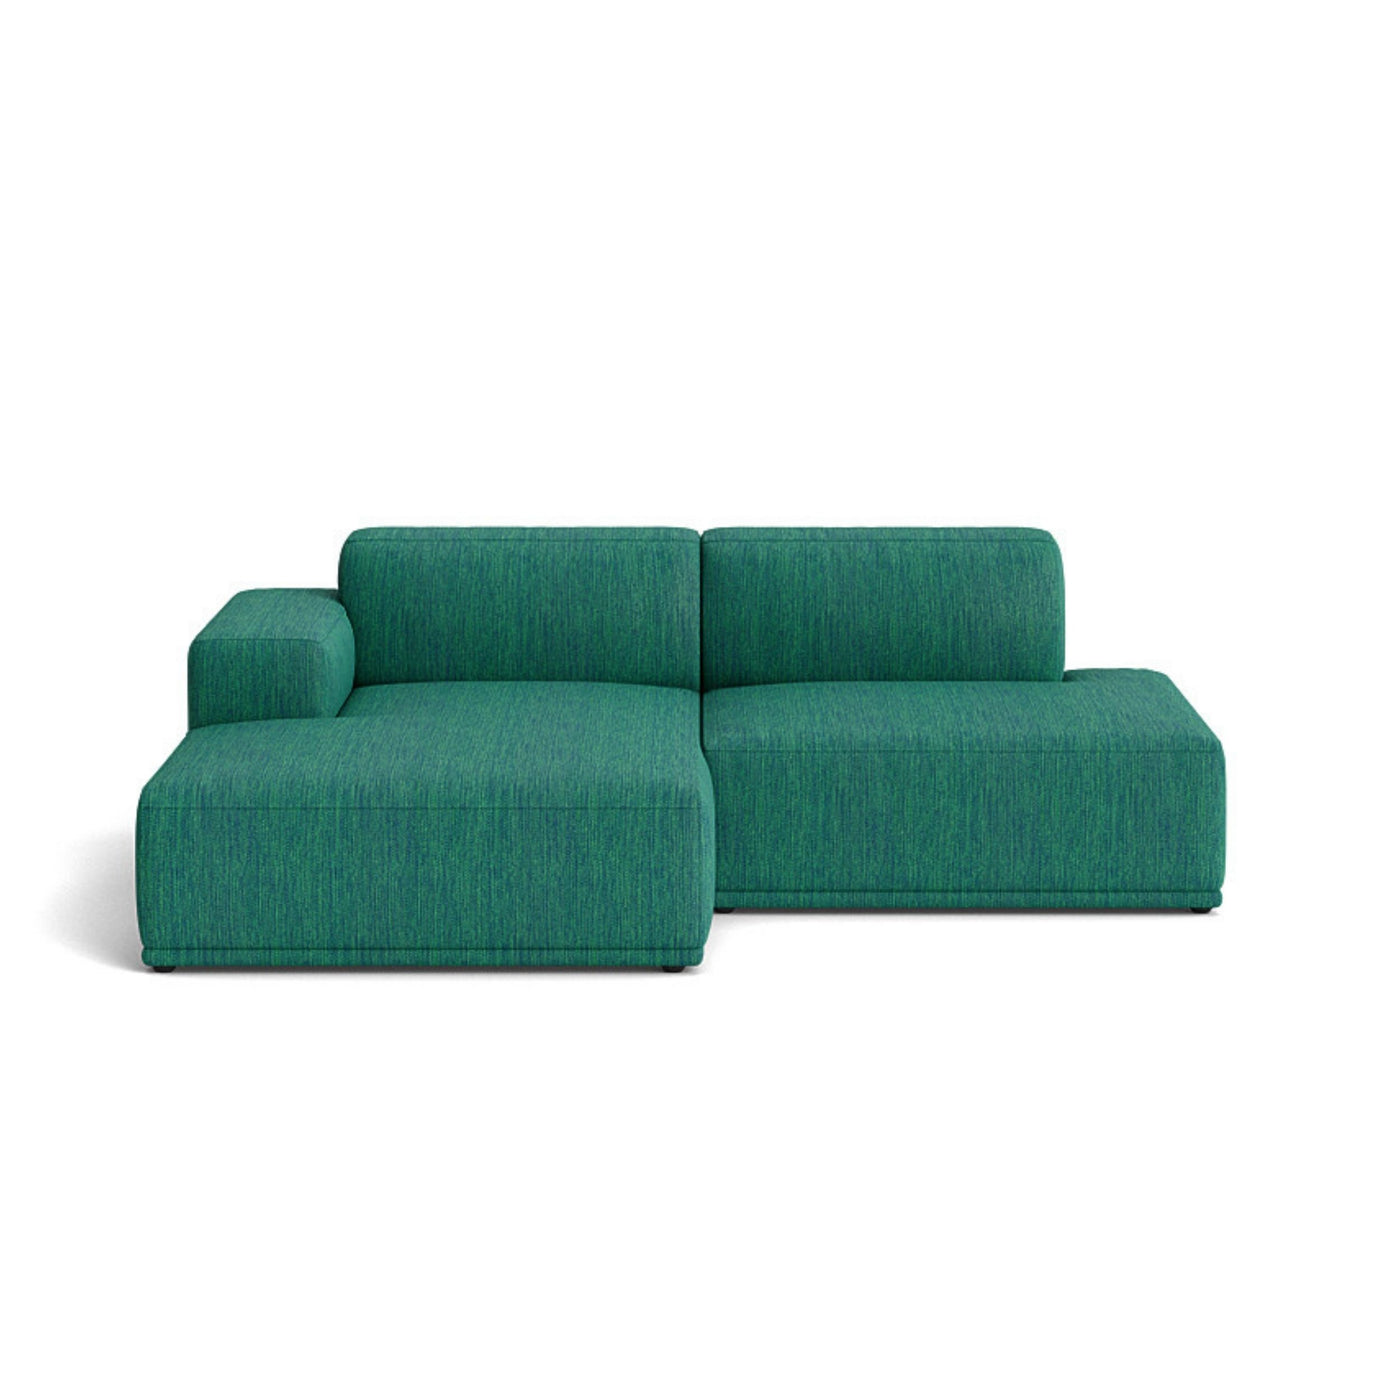 Muuto Connect Soft Modular 2 Seater Sofa, configuration 3. made-to-order from someday designs. #colour_balder-862